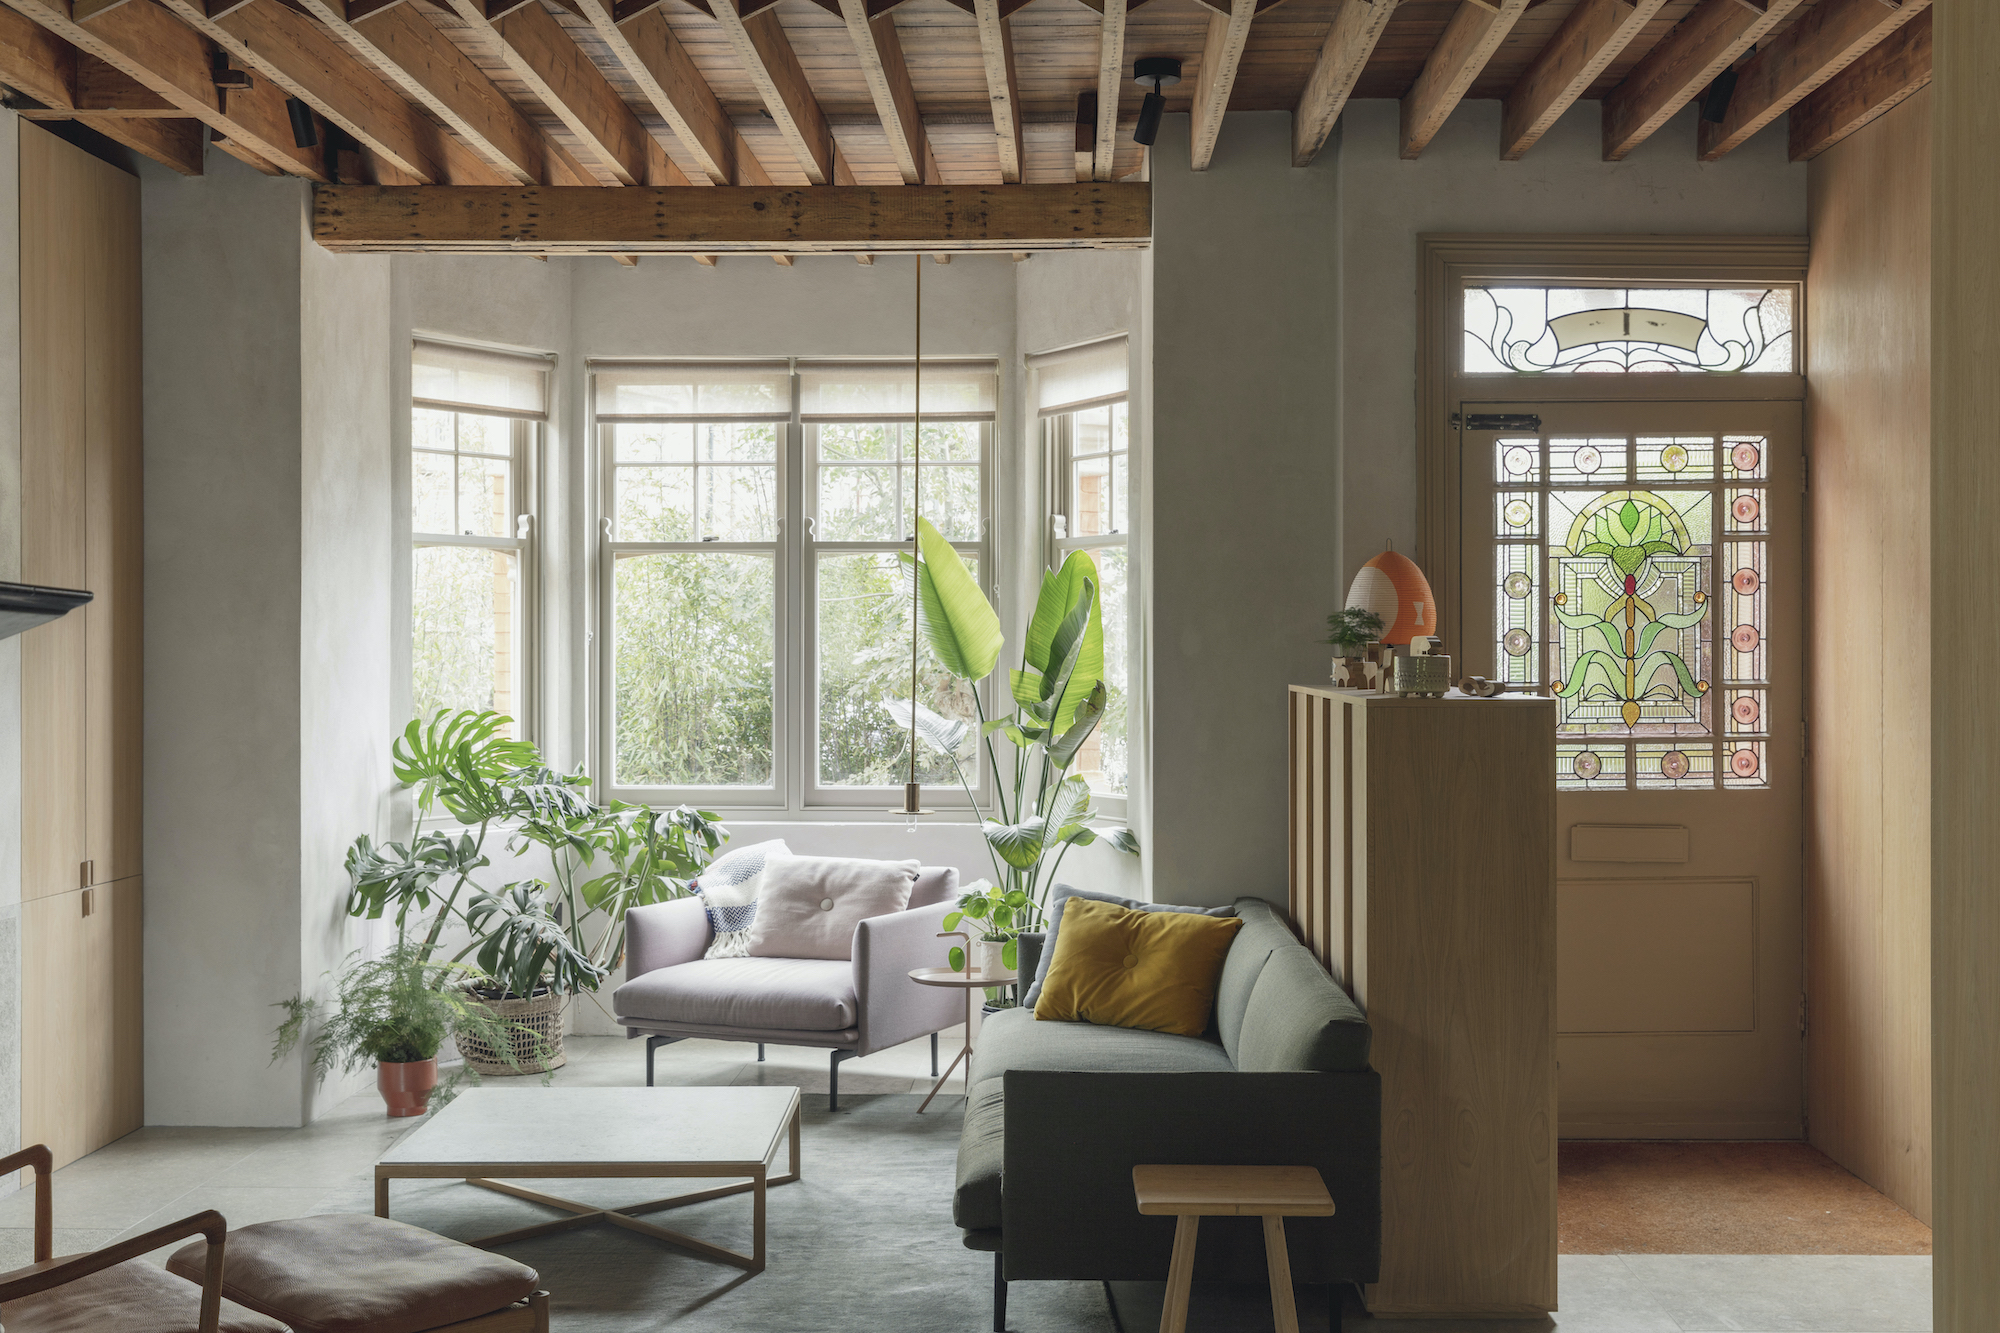 The Low Energy House: 10 Ideas to Steal from an Eco-Conscious Retrofit of a 1907 Townhouse - Remodelista